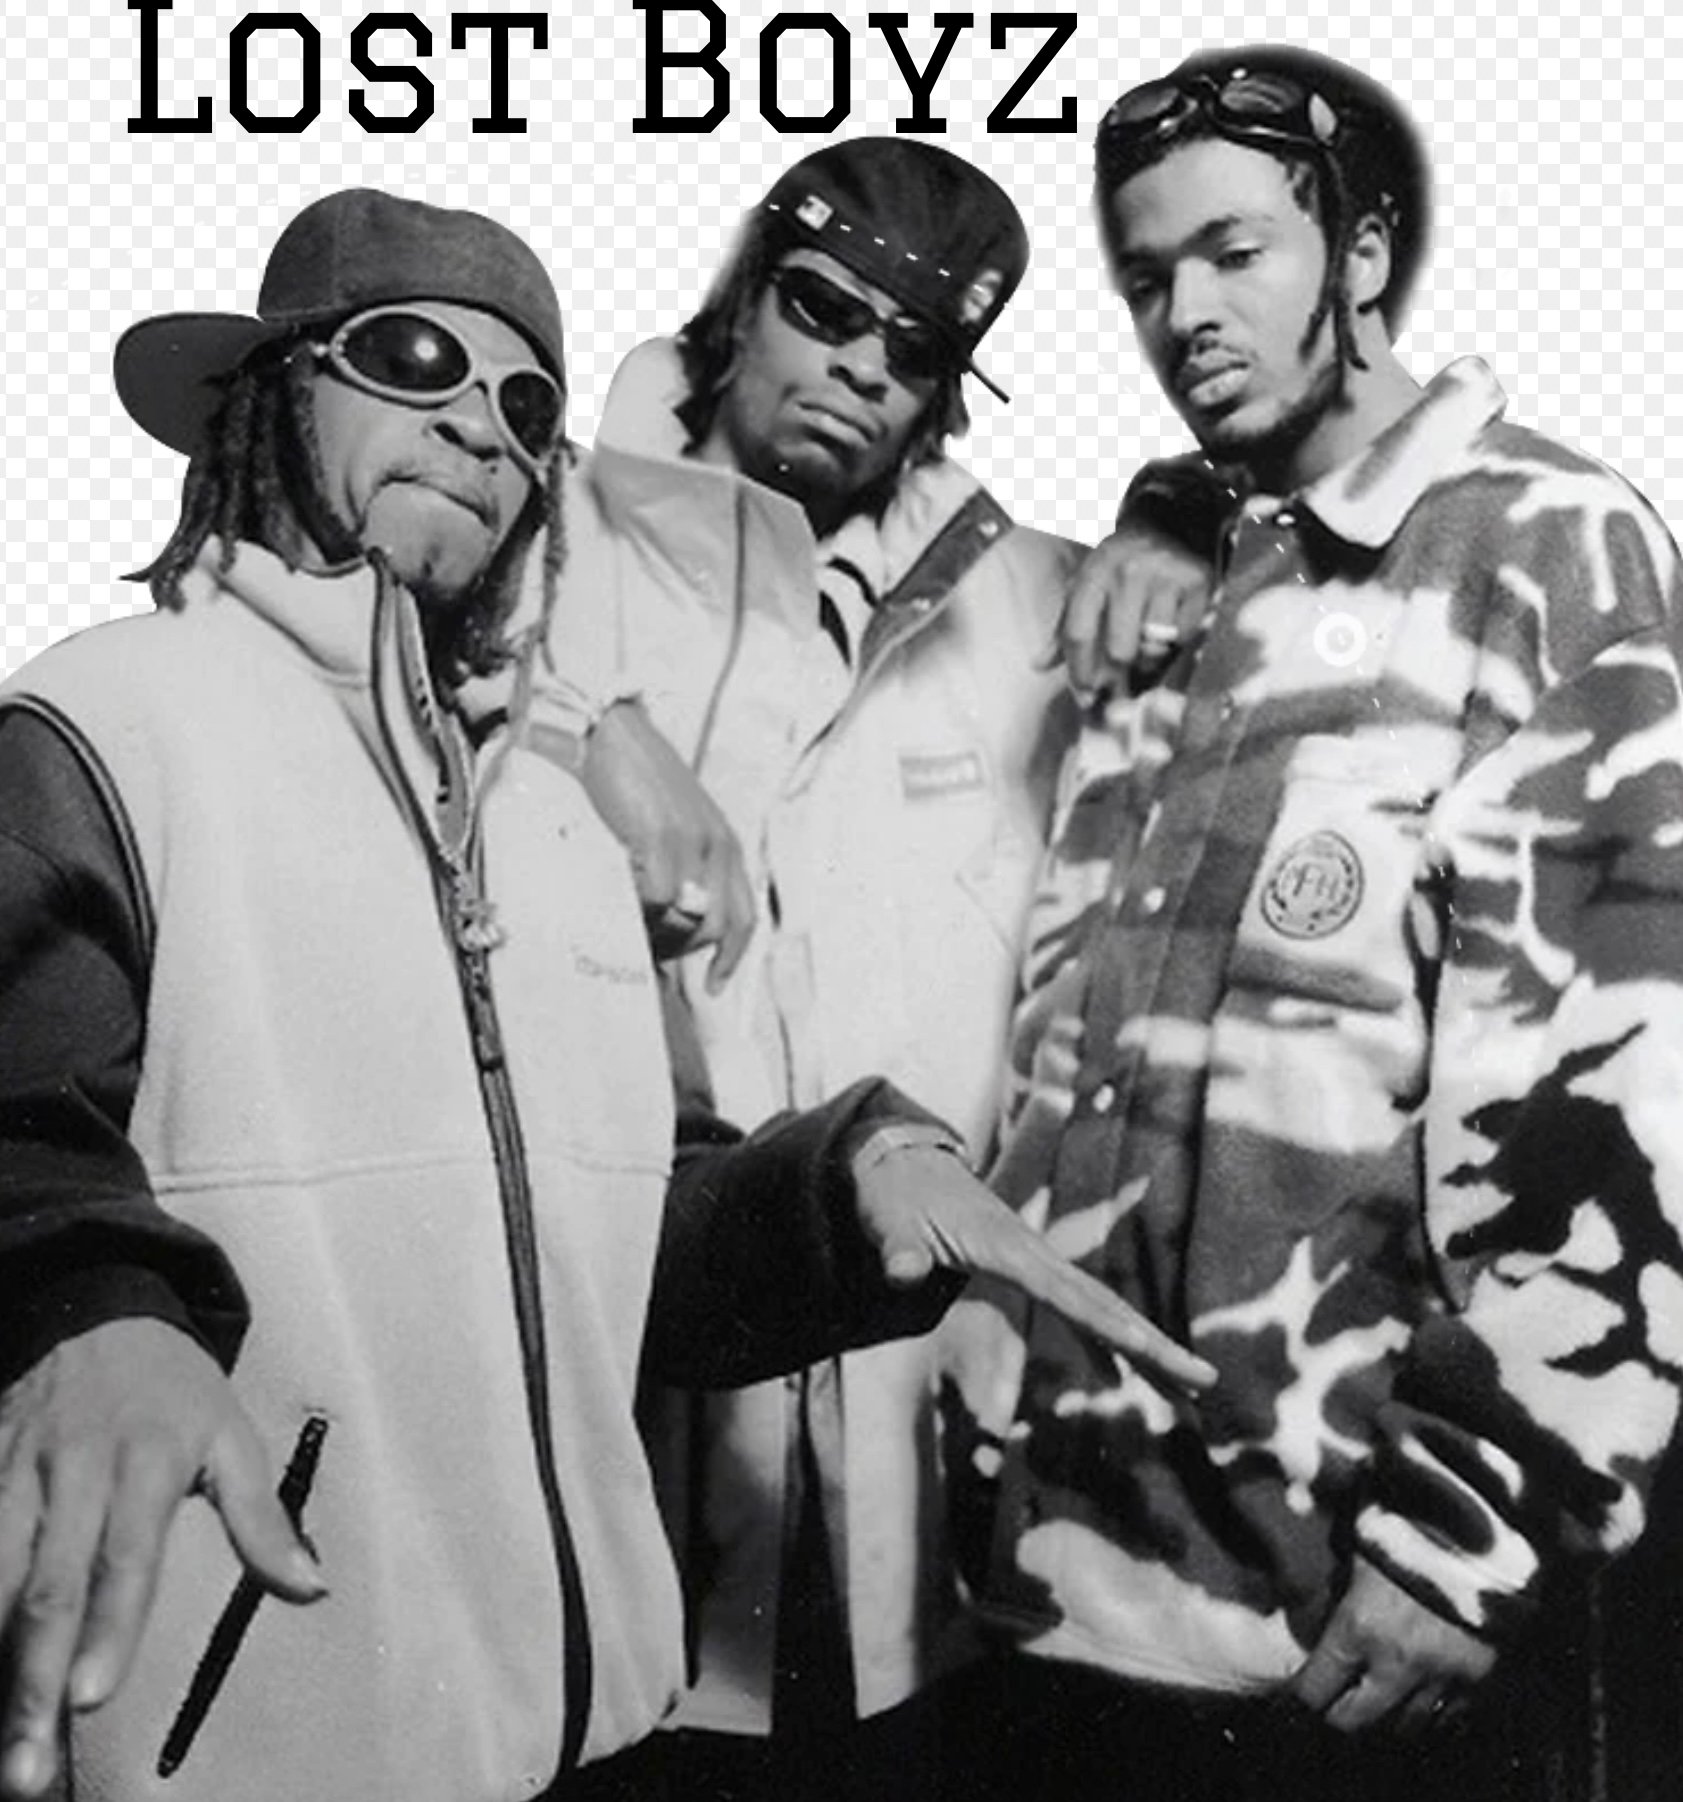 Art for Me and My Crazy World by Lost Boyz